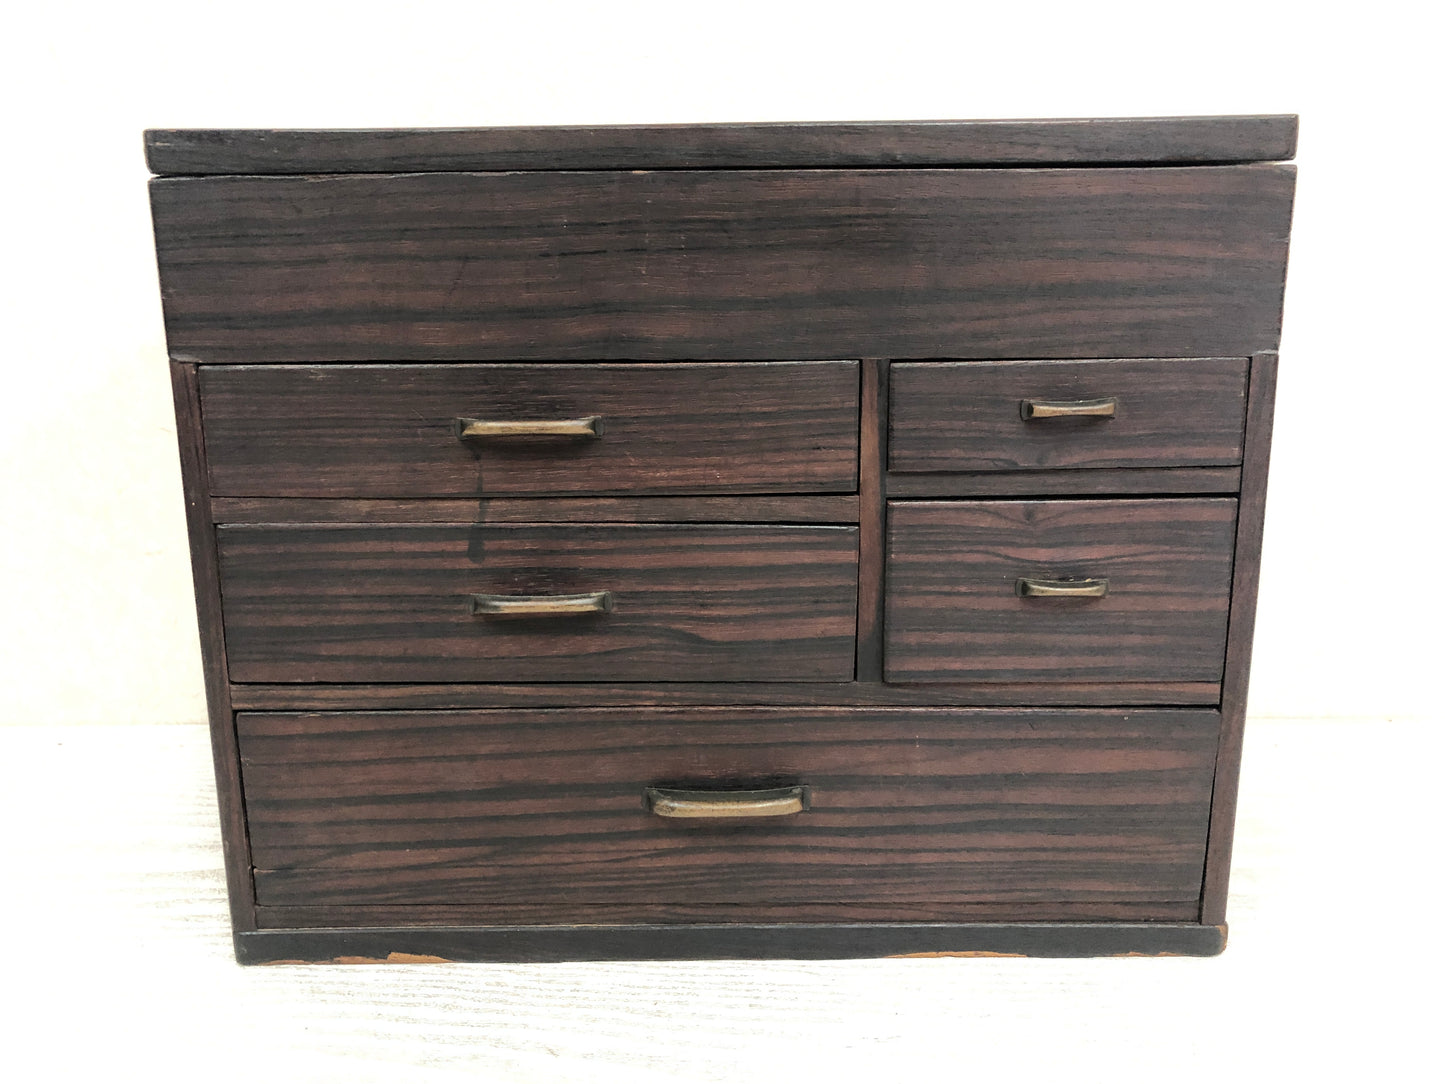 Y3853 TANSU Striped ebony sewing box chest of drawers Japanese antique storage